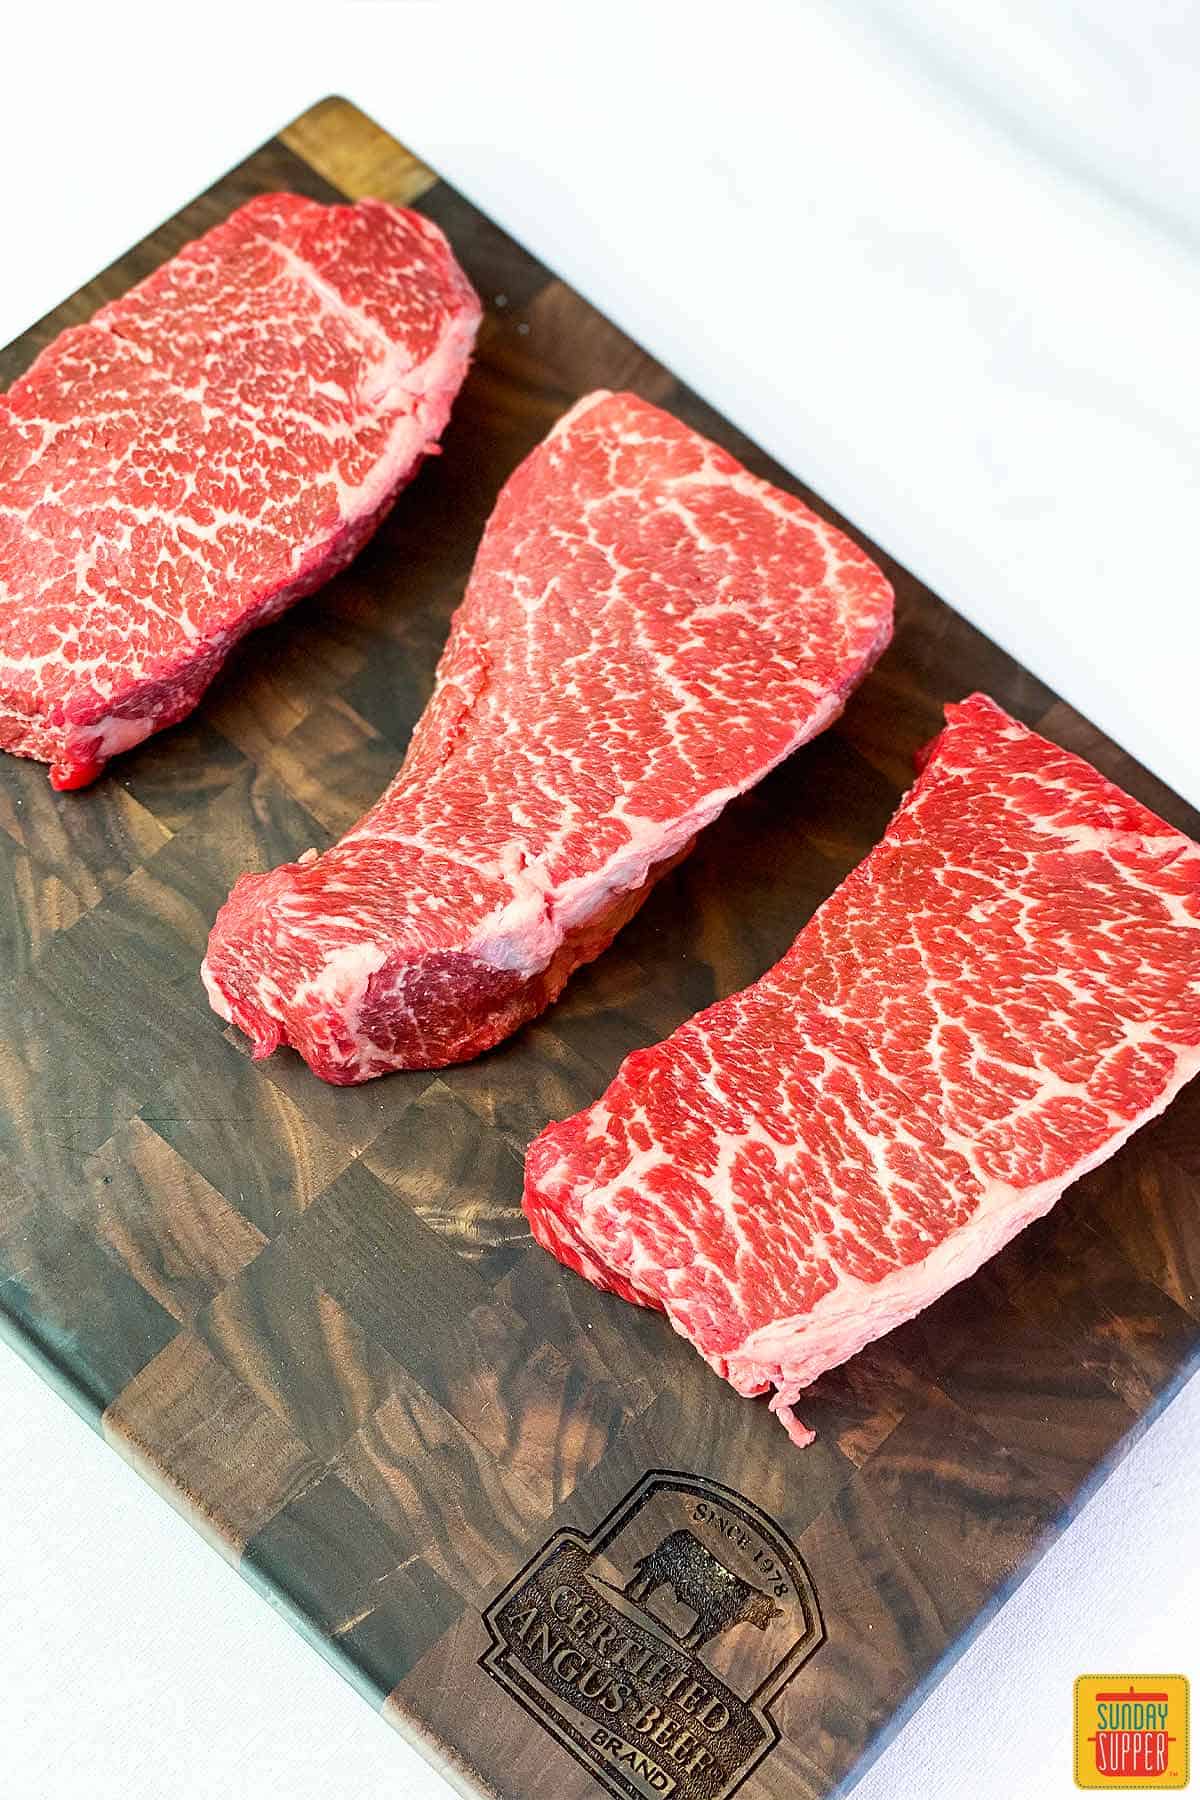 How Long To Grill Beef Short Ribs?